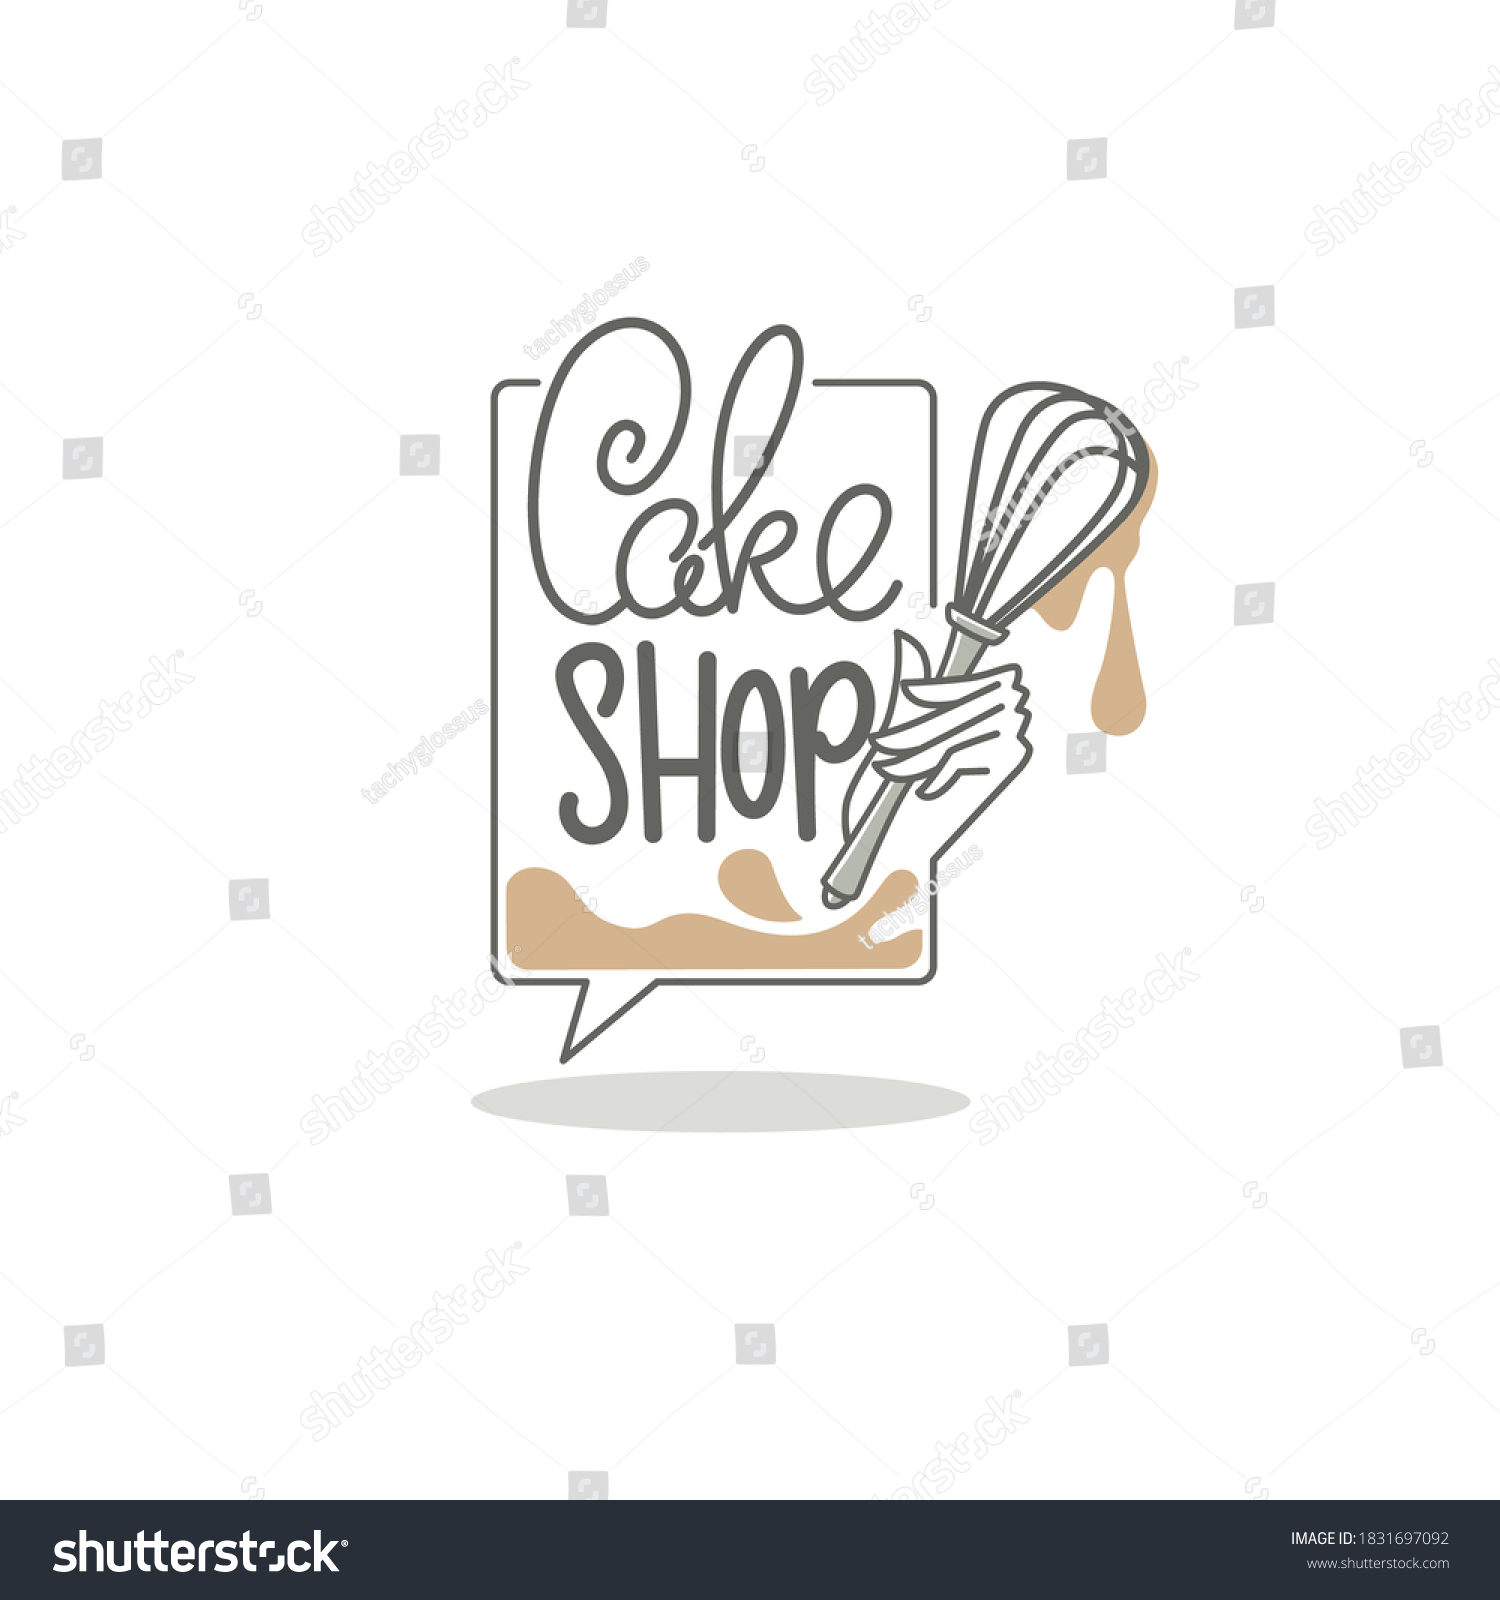 SVG of cake shop logo, with lettering conposition and hand image svg